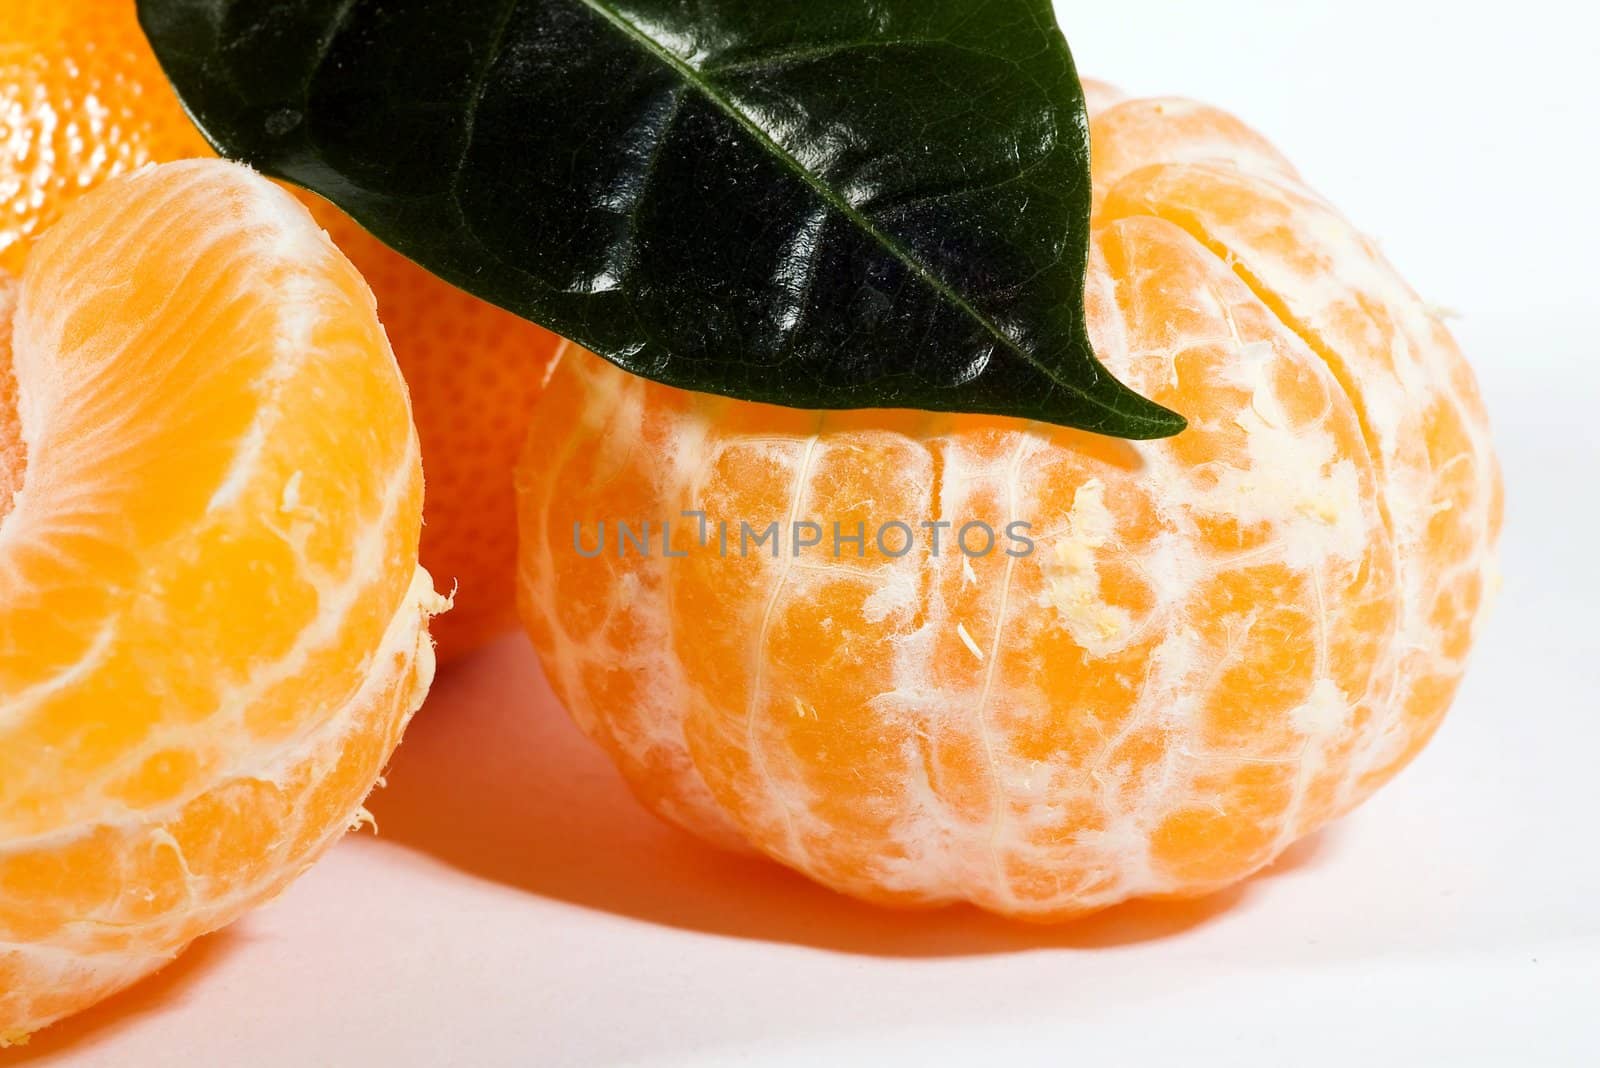 Tangerines on the white background